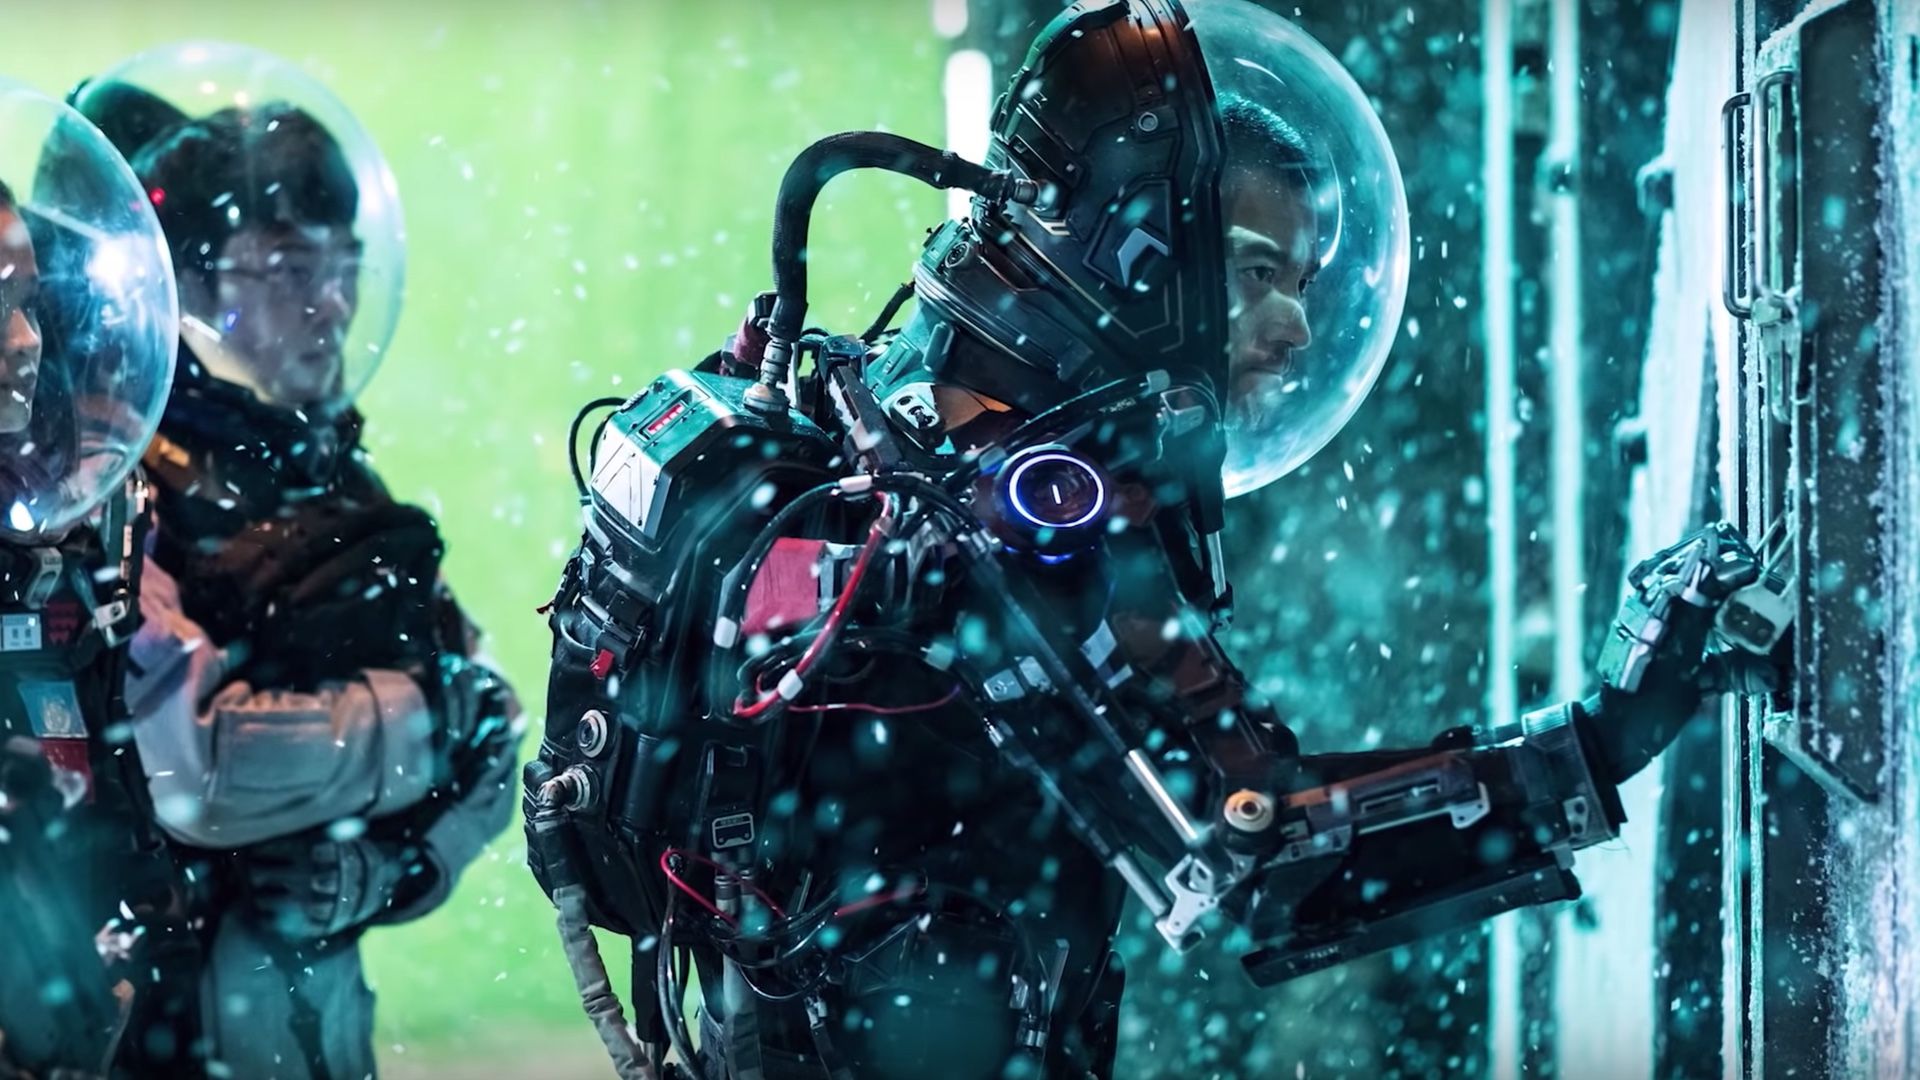 Weta Workshop Takes You Behind The Scenes Of Crafting The Tech Suits For THE WANDERING EARTH